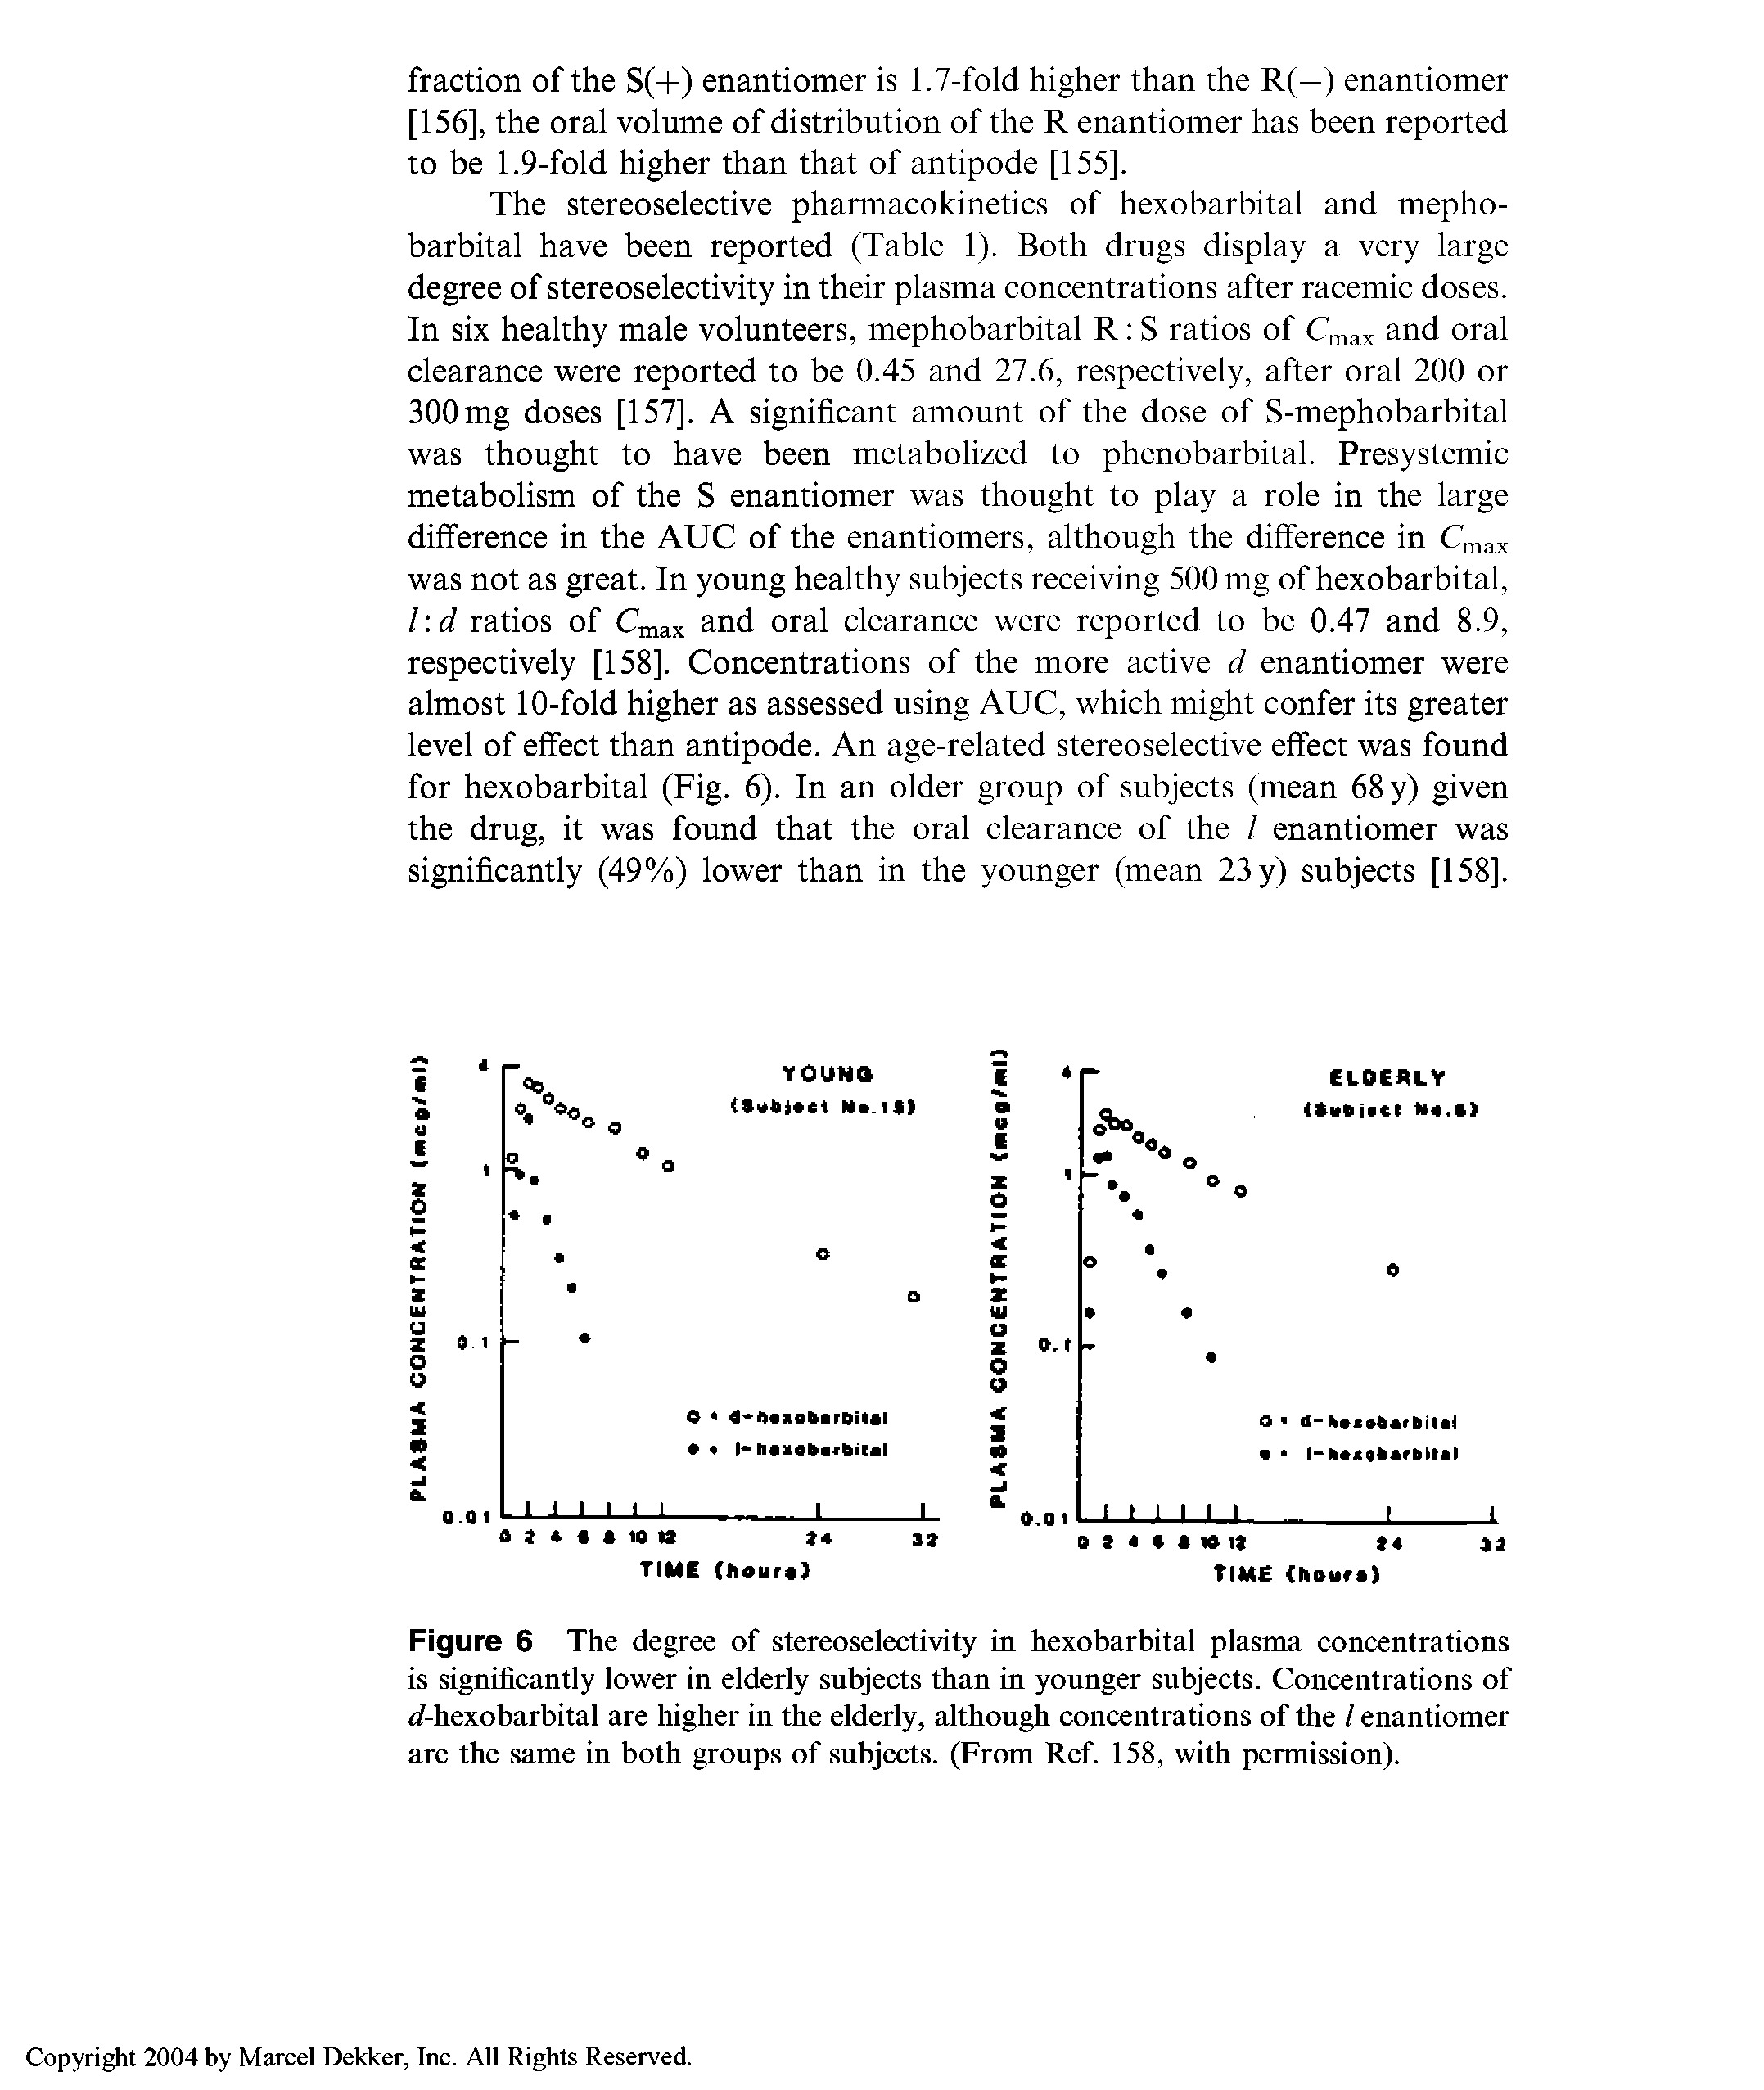 Figure 6 The degree of stereoselectivity in hexobarbital plasma concentrations is significantly lower in elderly subjects than in younger subjects. Concentrations of d-hexobarbital are higher in the elderly, although concentrations of the / enantiomer are the same in both groups of subjects. (From Ref. 158, with permission).